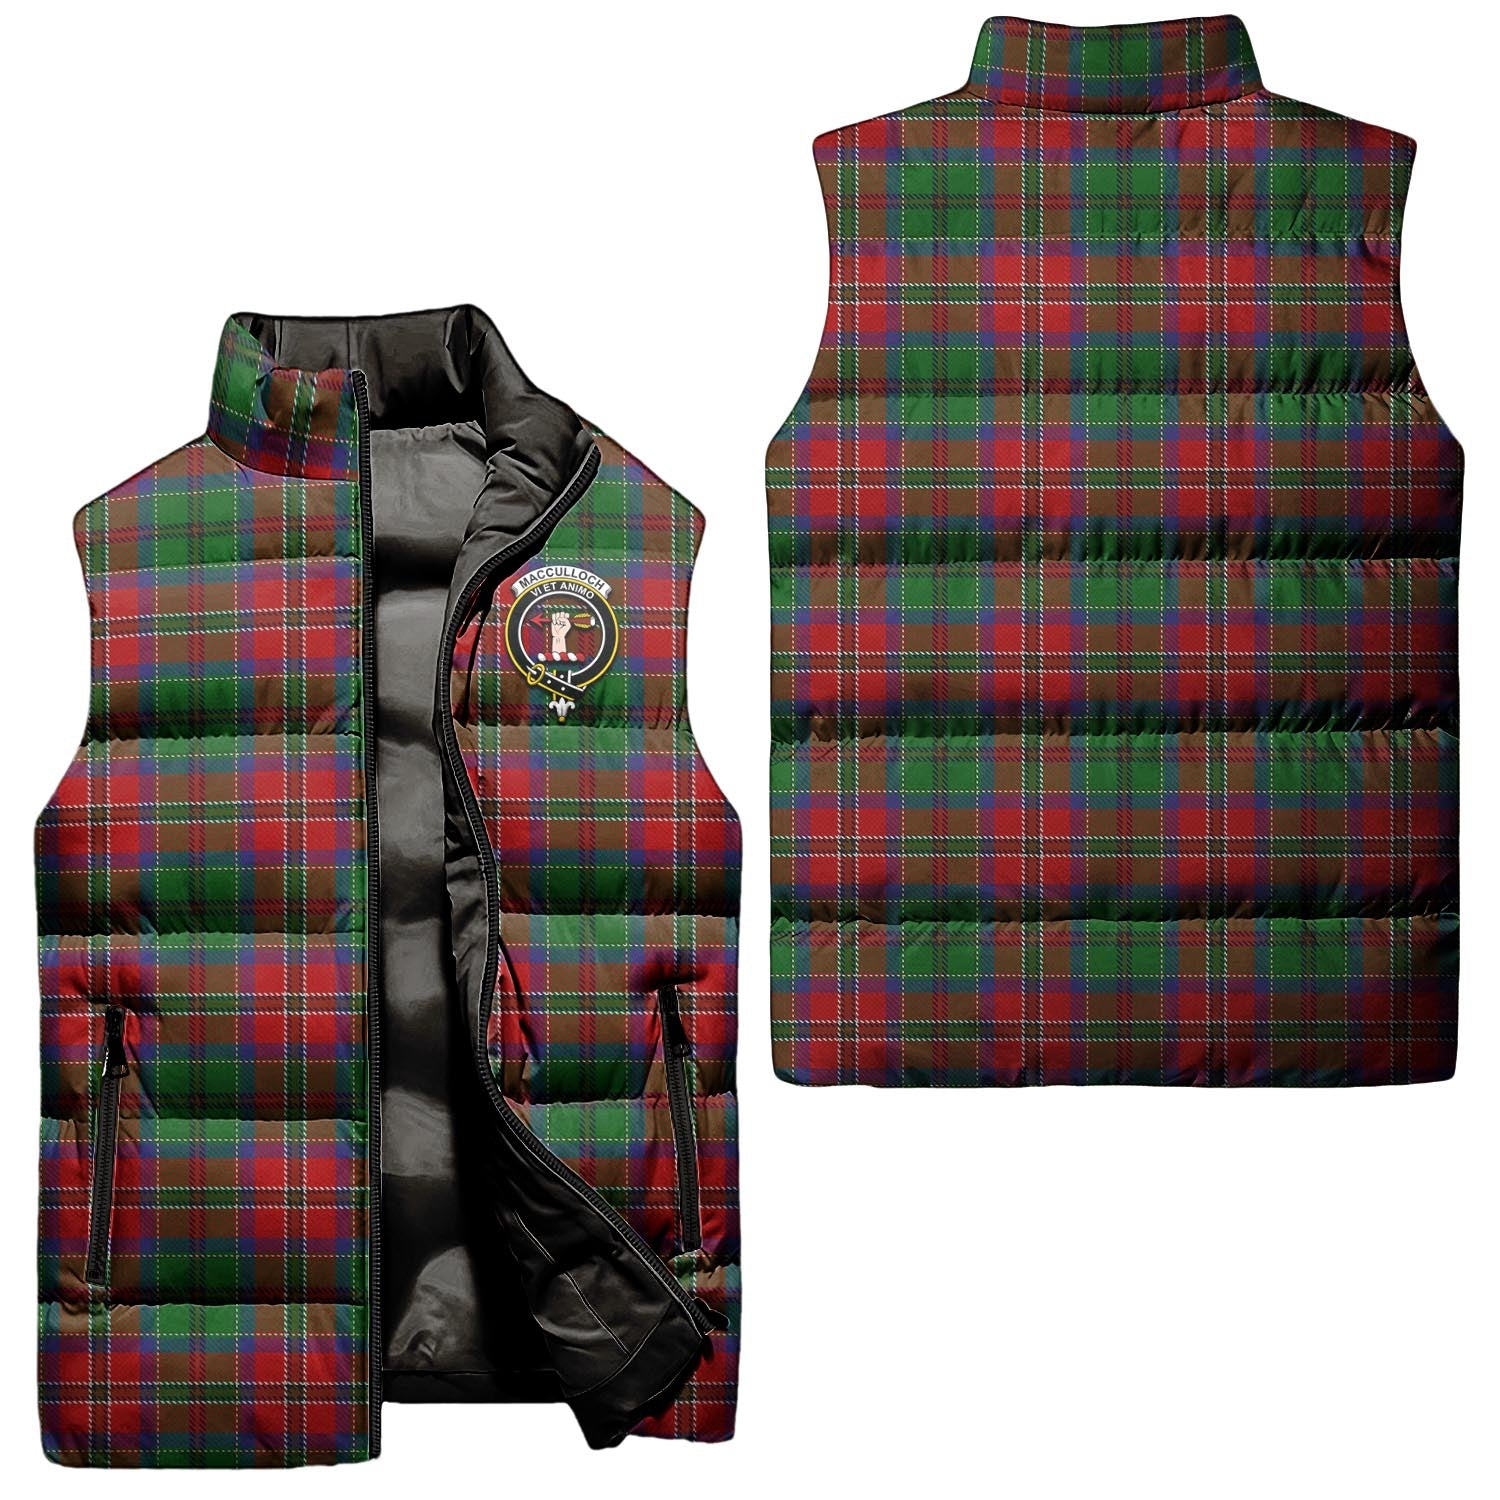 macculloch-clan-puffer-vest-family-crest-plaid-sleeveless-down-jacket